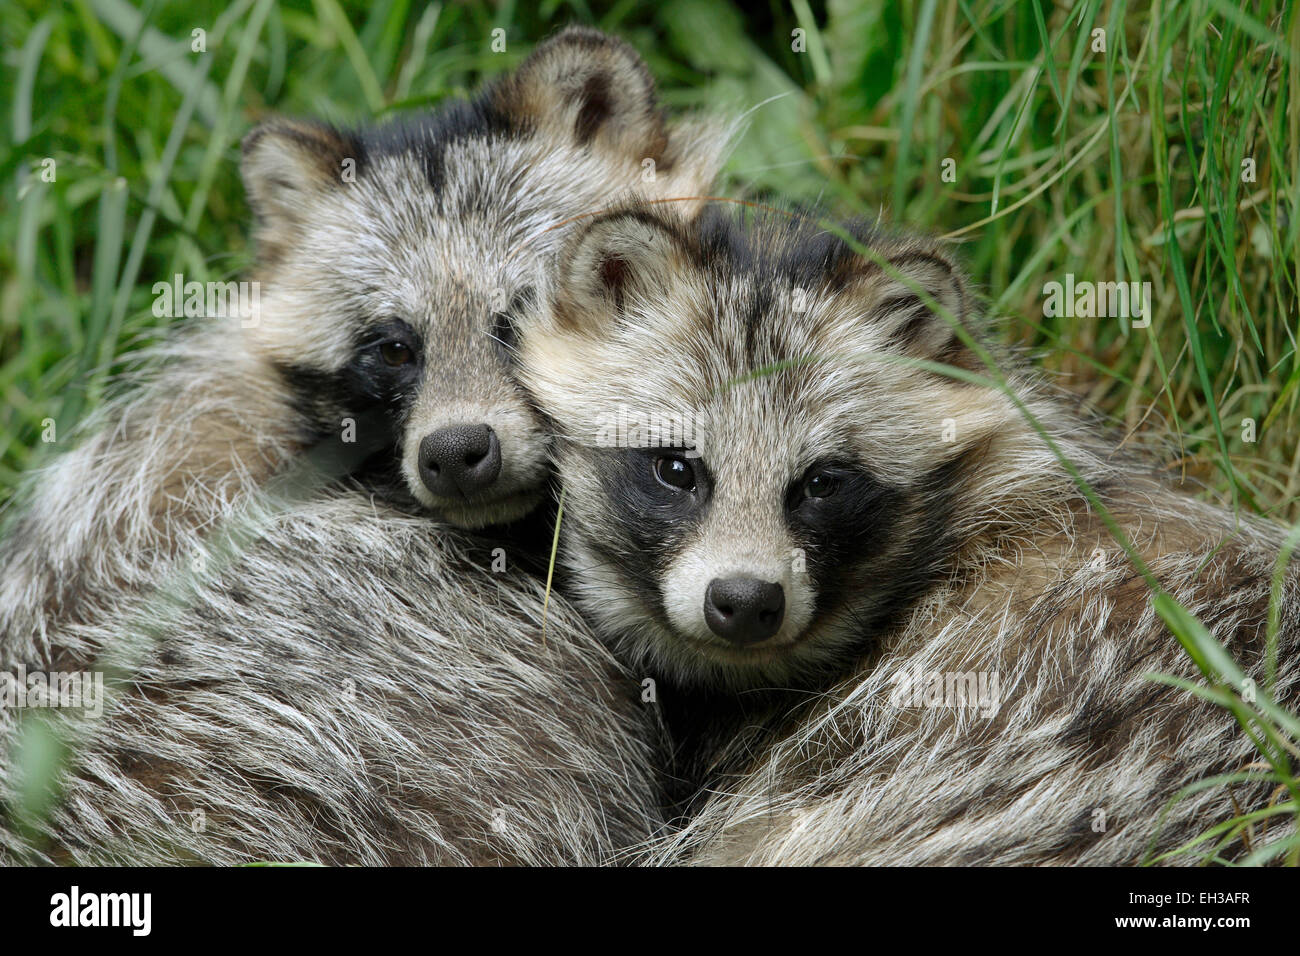 Close-up Portrait of Two Raccoon Dogs (Nyctereutes procyonoides) Snuggled Together, Hesse, Germany Stock Photo